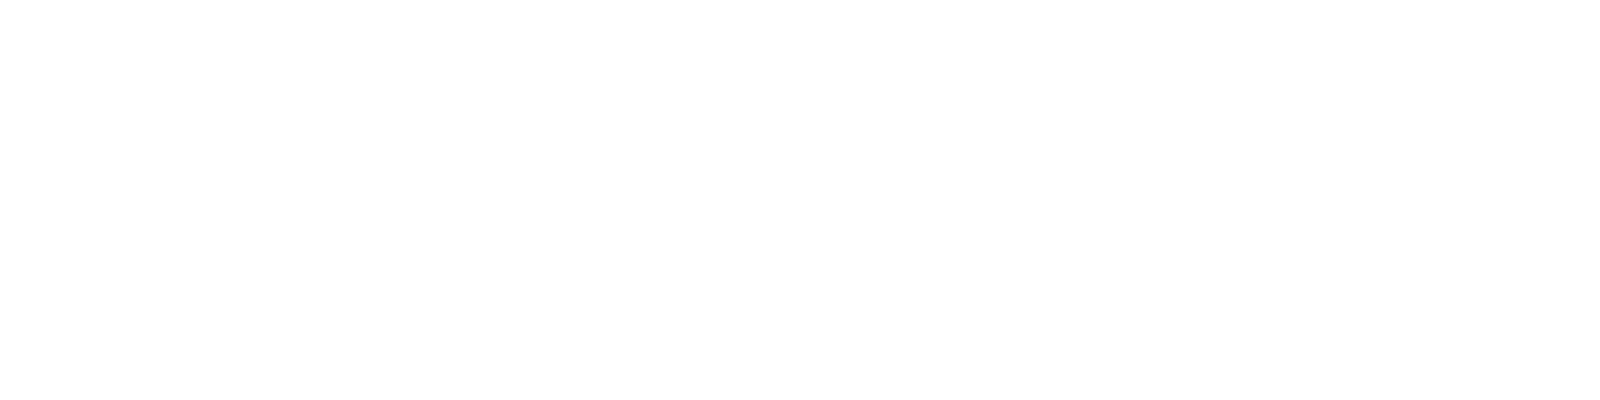 GD Compassion Culture Series Podcast